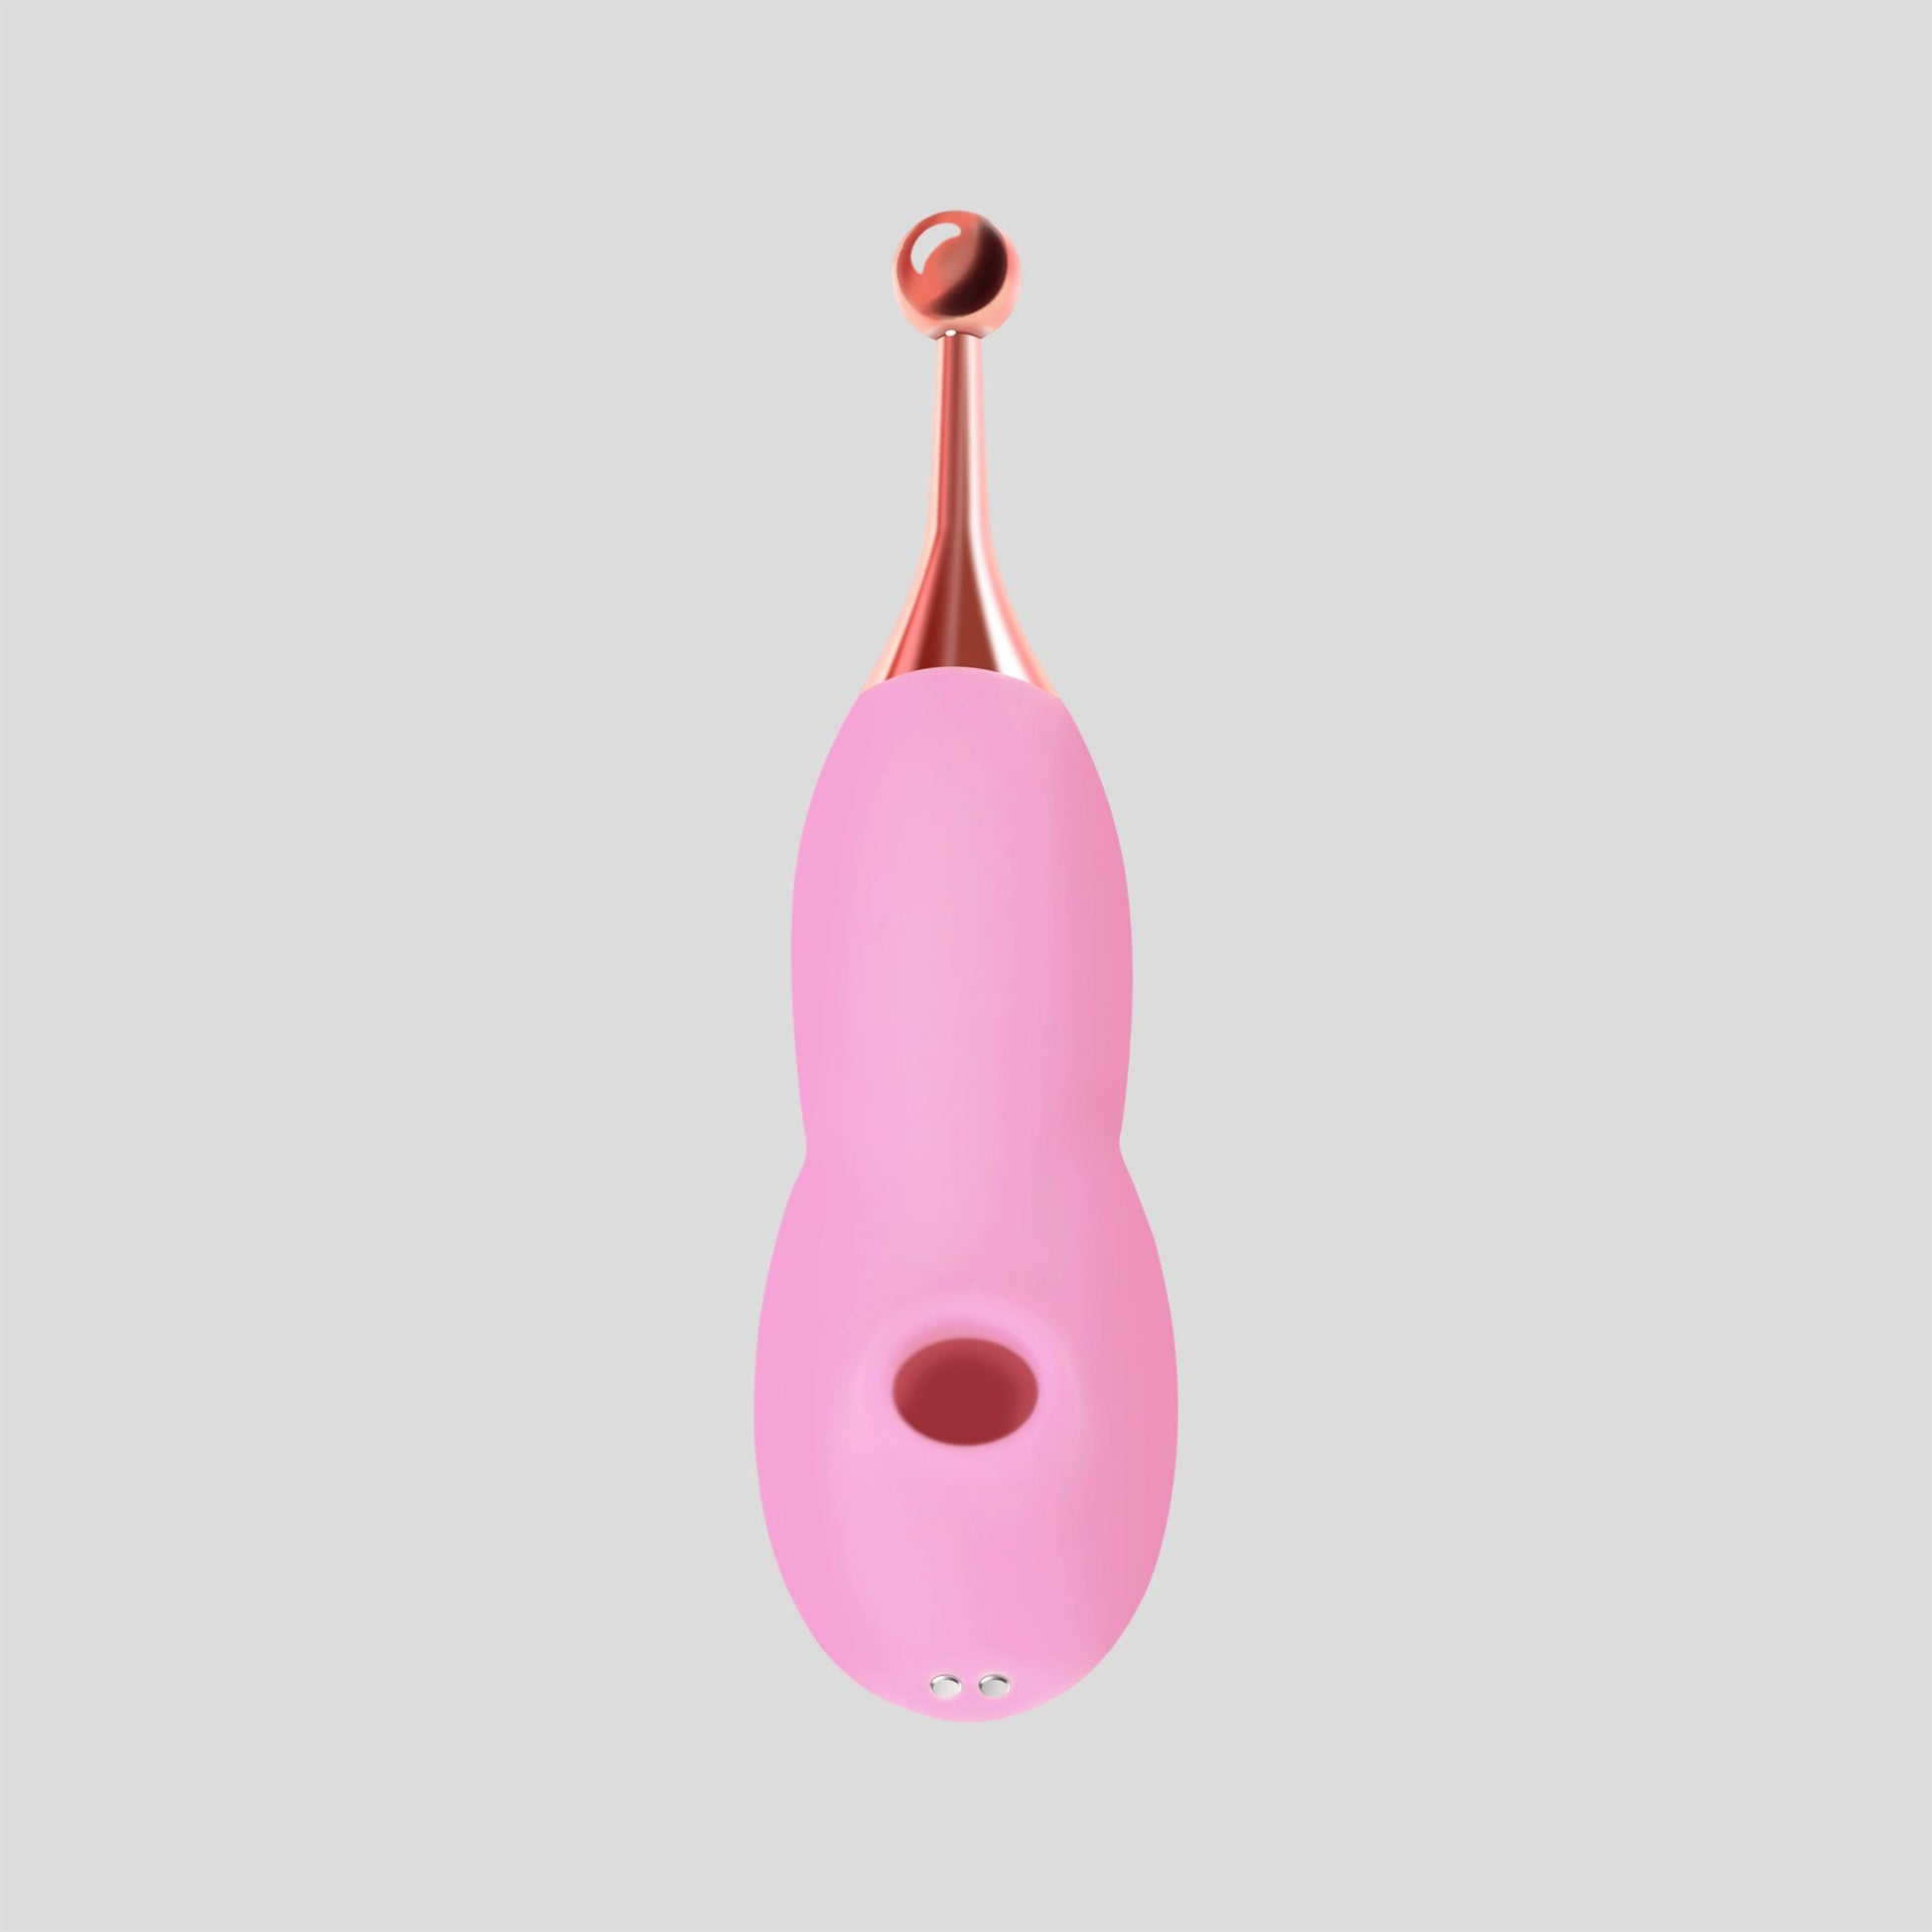 Susie-Mae - 2 in 1 Clitoral Vibrator - Shopping & Things